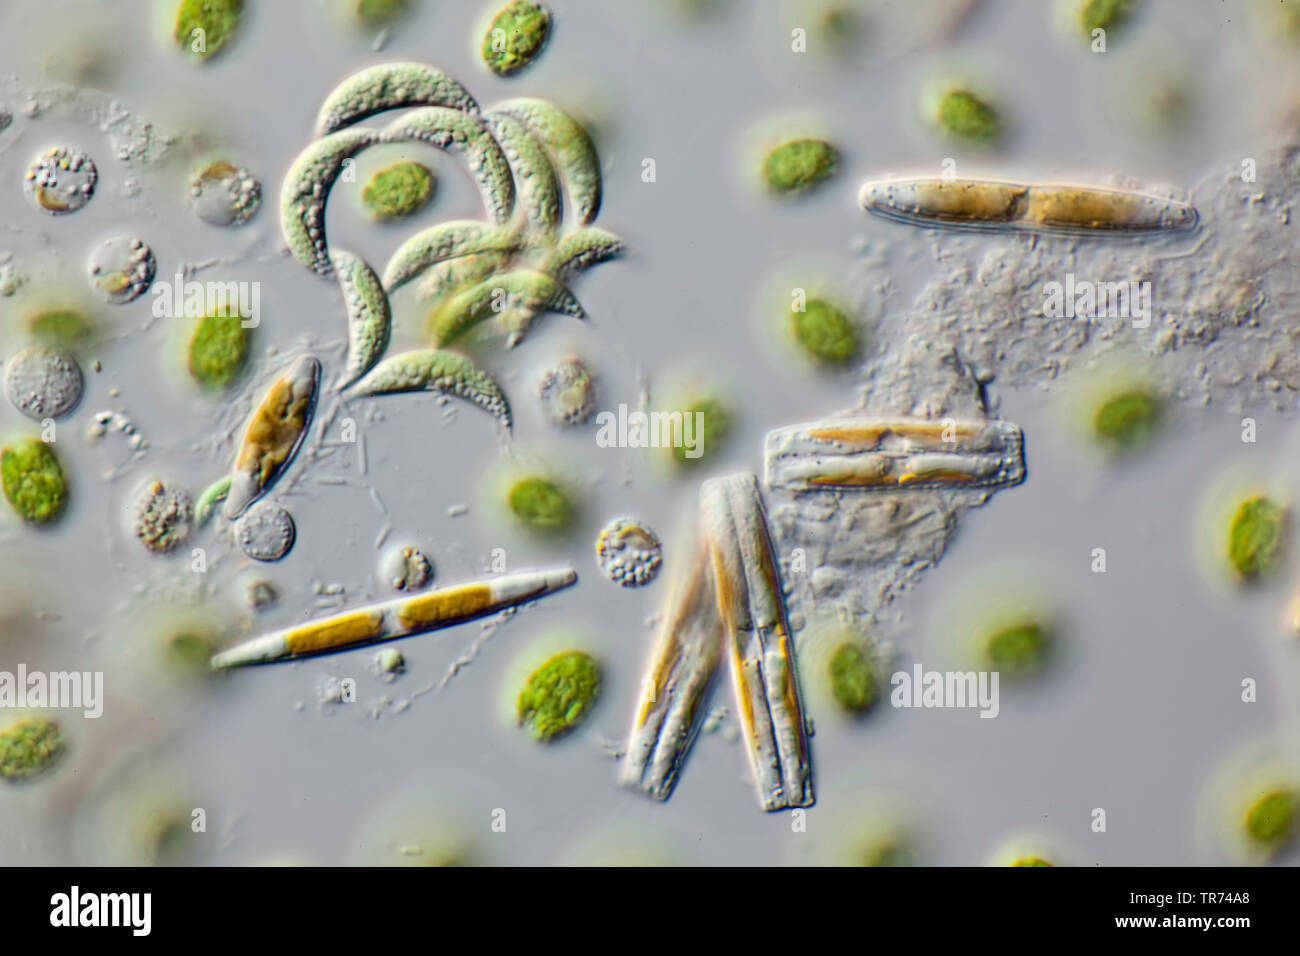 diatom (Diatomeae), living diatoms from West Iceland, in differential interference contrast, x 80, Iceland Stock Photo